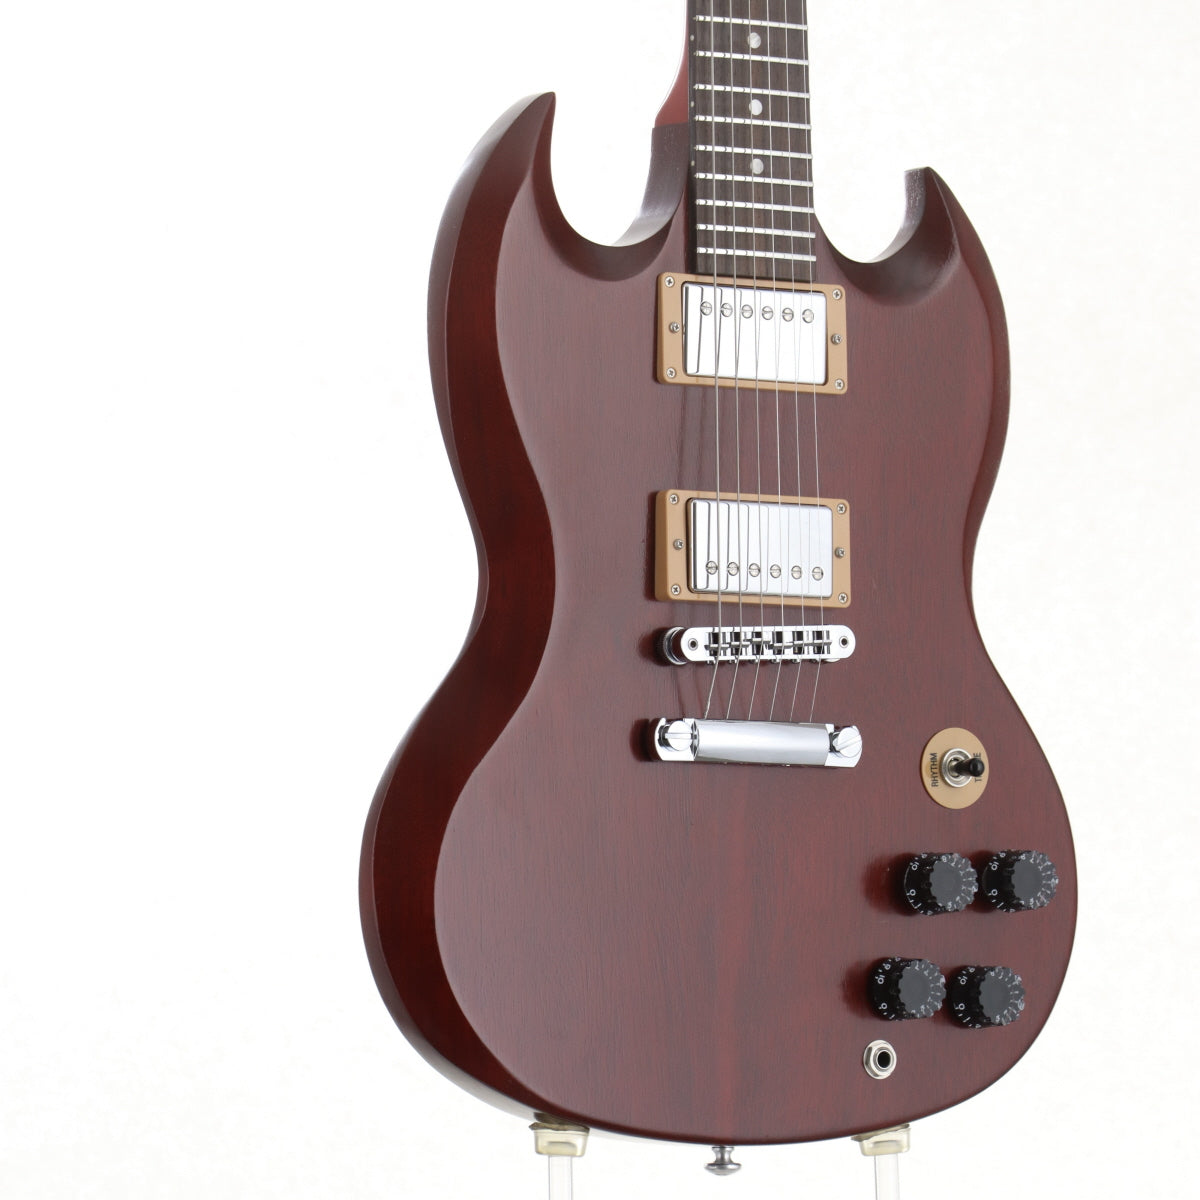 [SN 1400624711] USED GIBSON USA / SG Special 120th Anniversary Heritage Cherry [10]